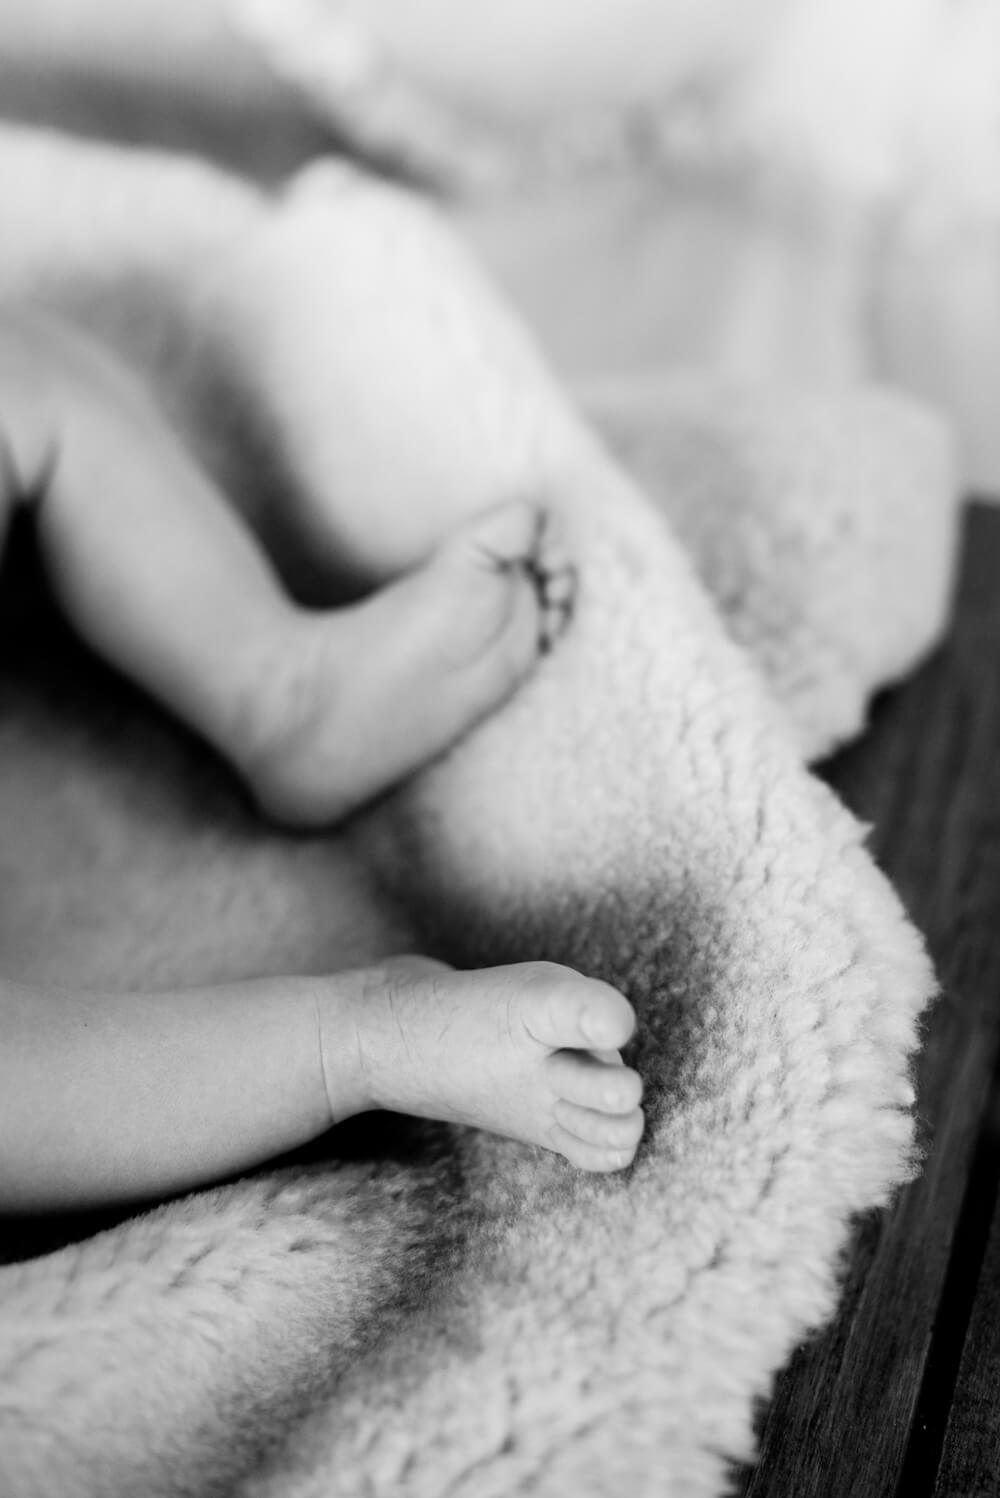 black and white image of a newborn baby's feet